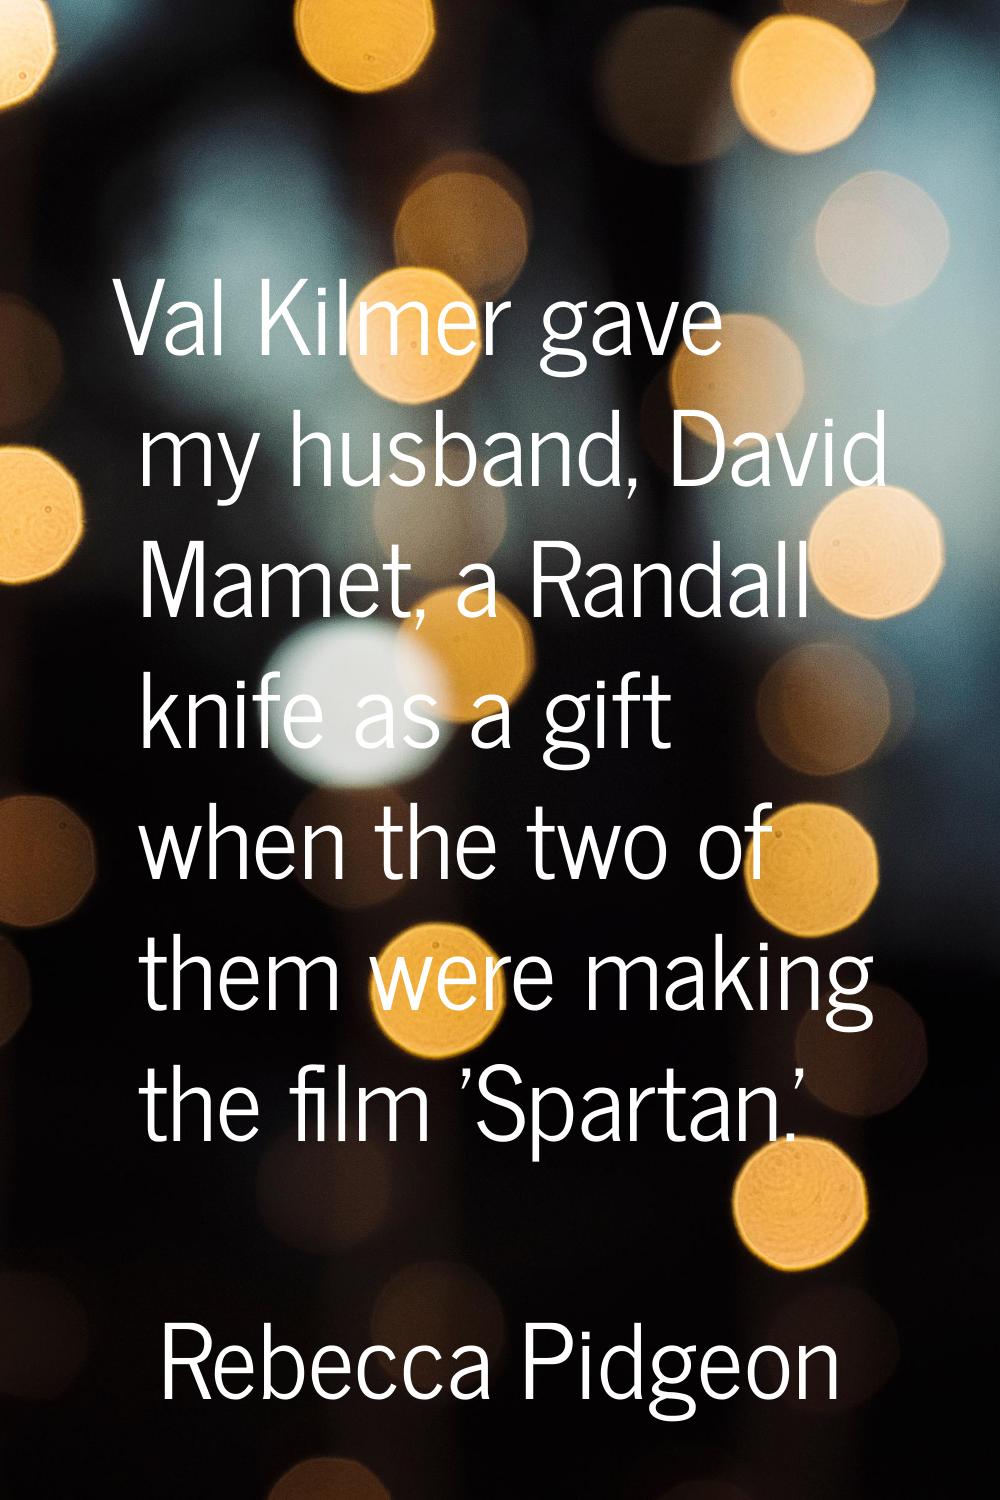 Val Kilmer gave my husband, David Mamet, a Randall knife as a gift when the two of them were making